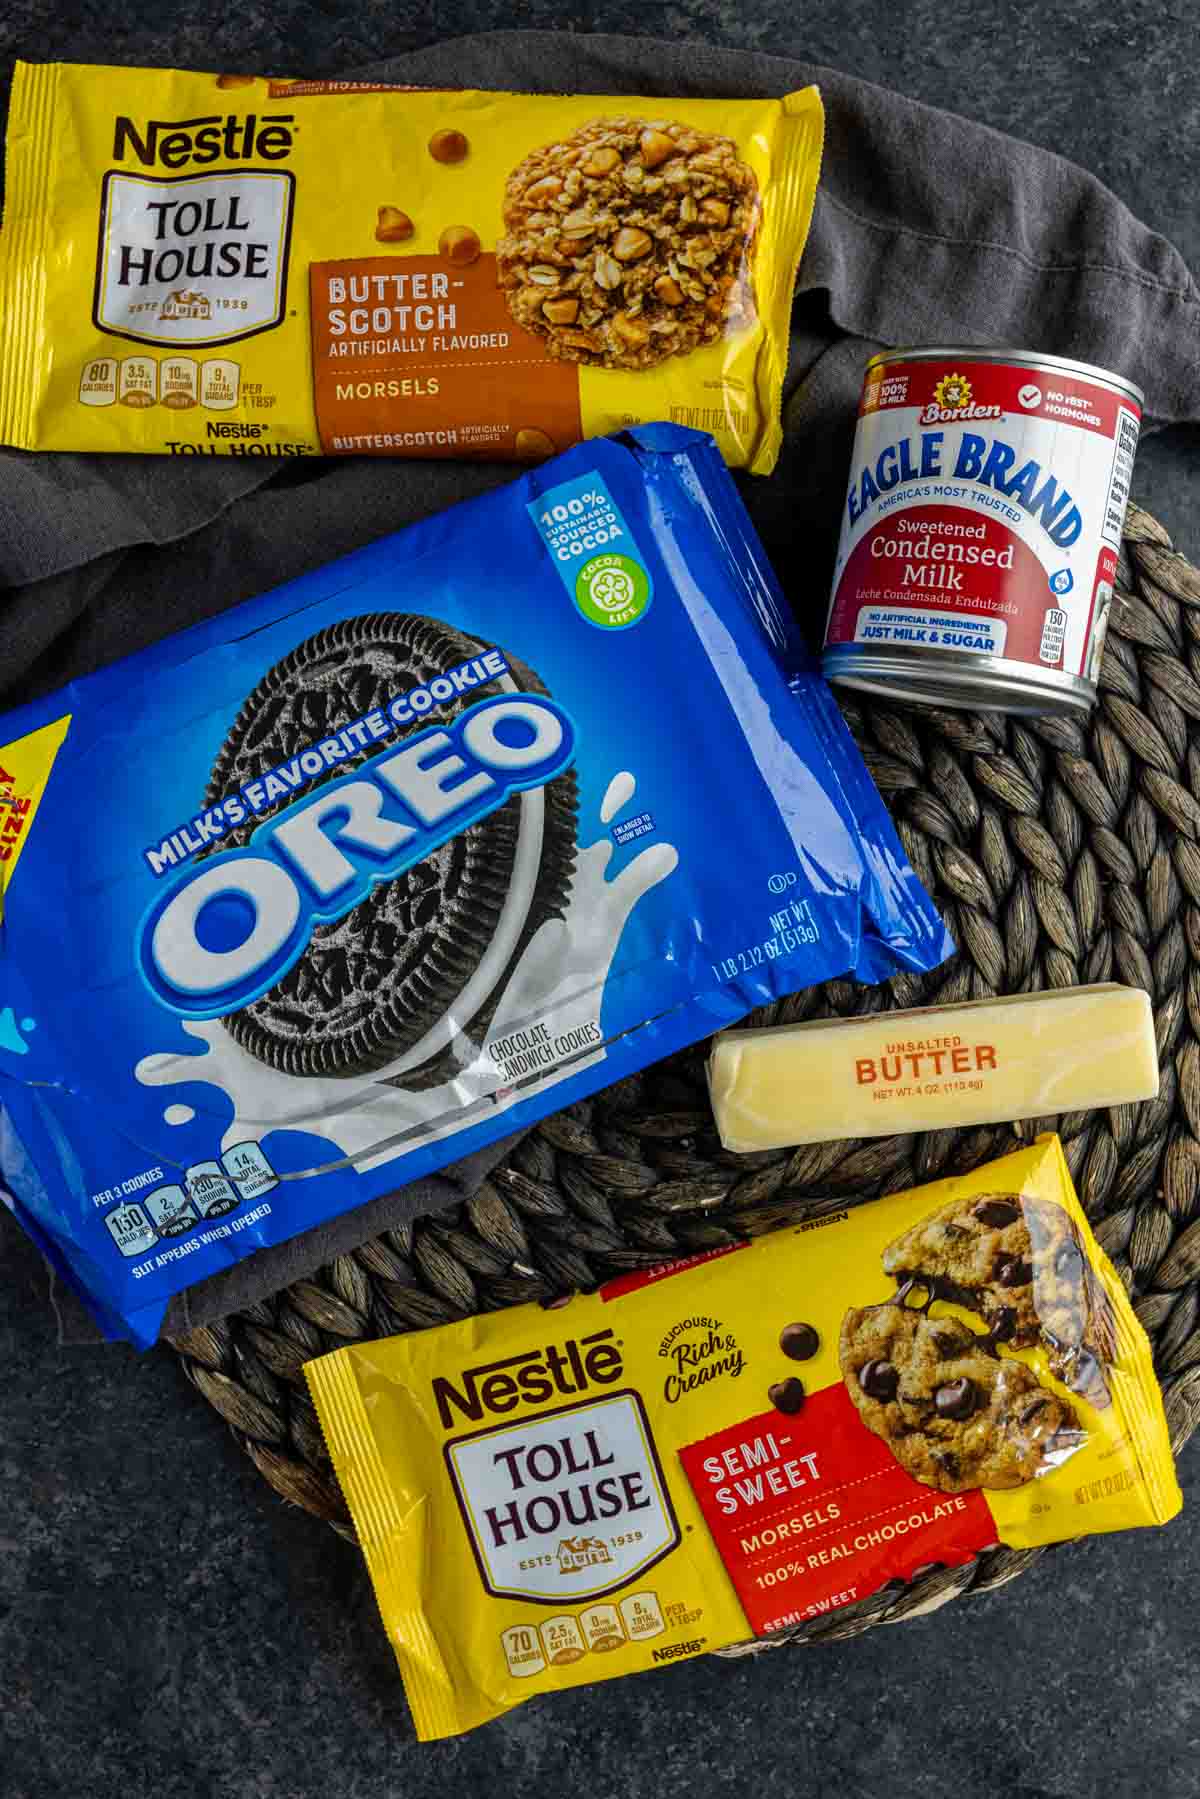 Oreos and ingredients to make Oreo Magic Bars on a wicker placemat.